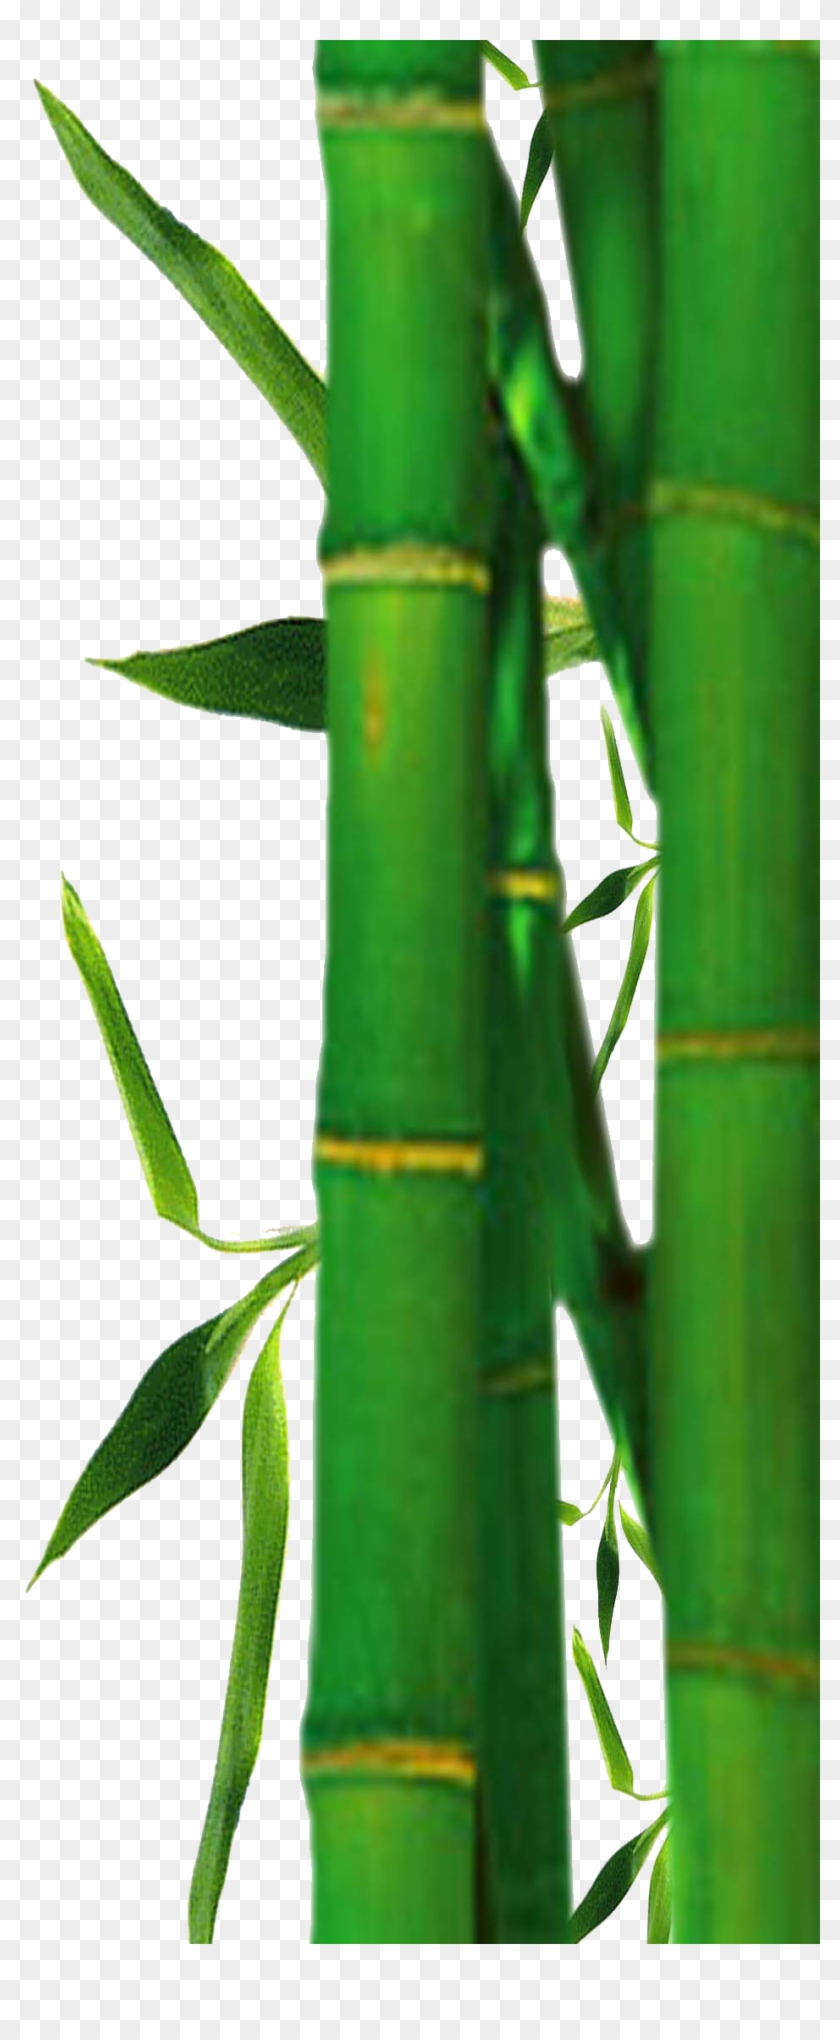 Bamboo Clipart - Bamboo Tree Png Clipart #384917